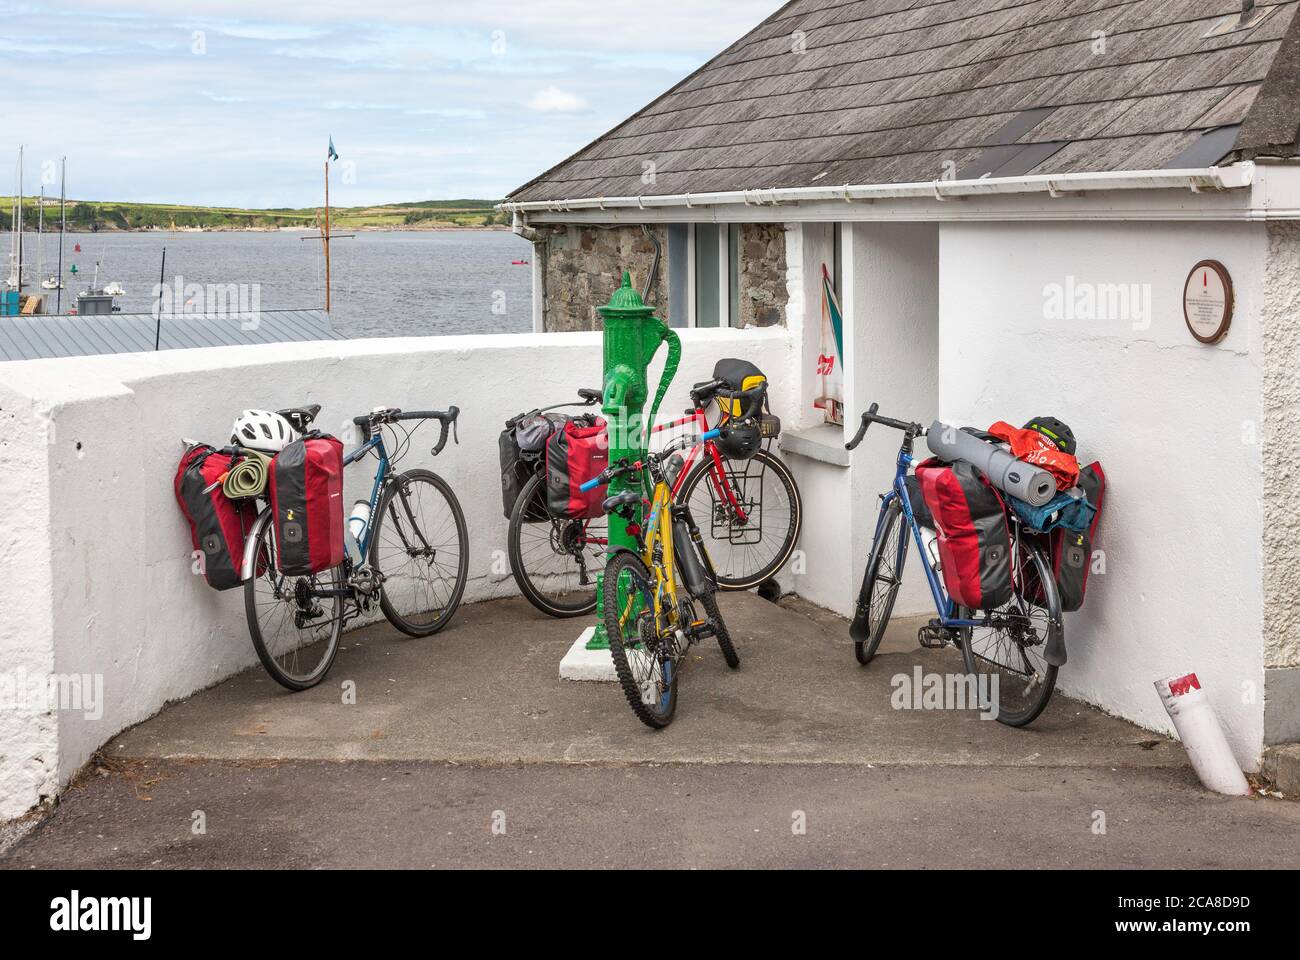 Baltimore Ireland High Resolution Stock Photography And Images Alamy